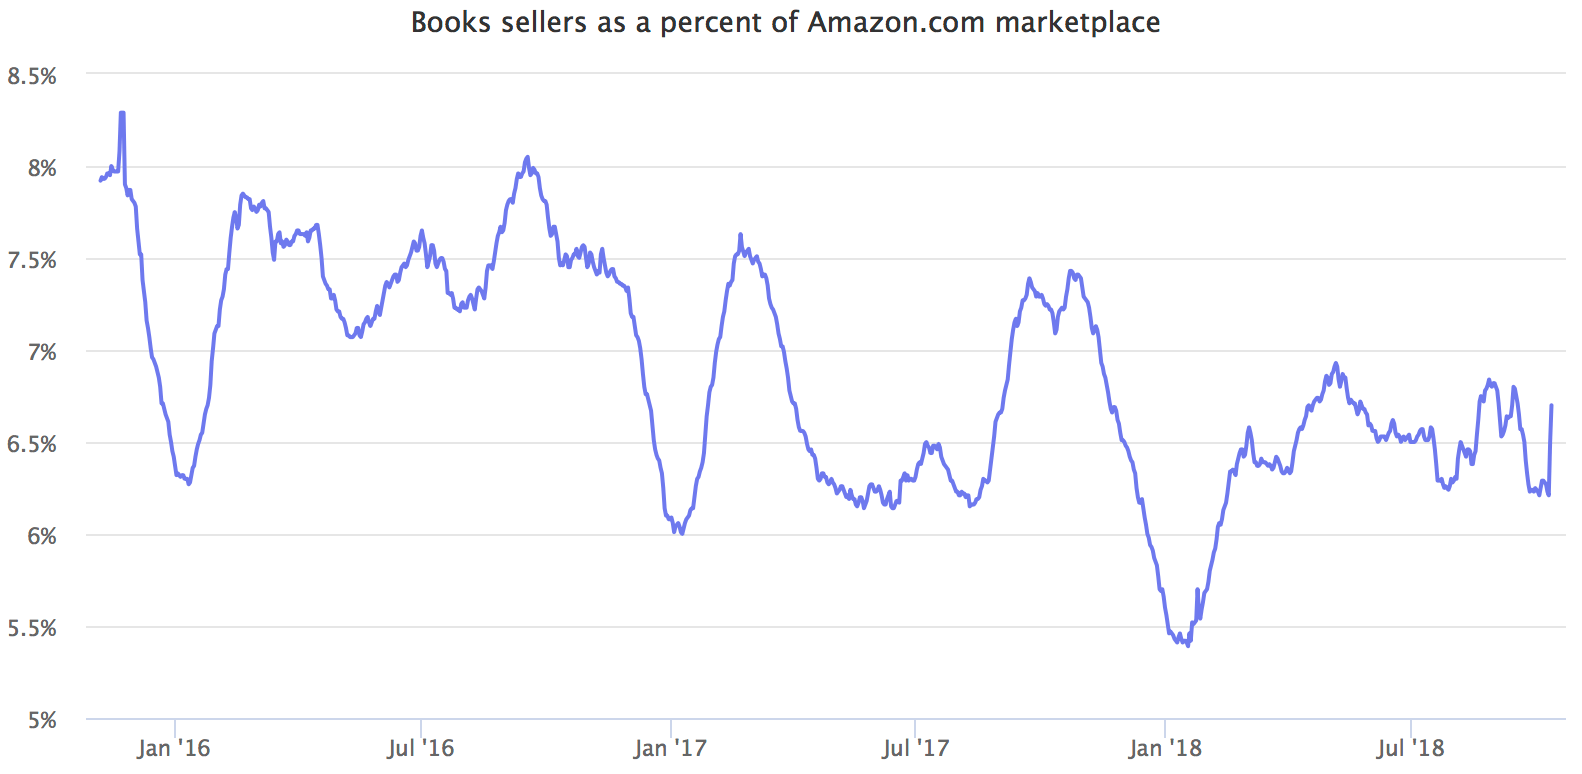 Books sellers as a percent of Amazon.com marketplace